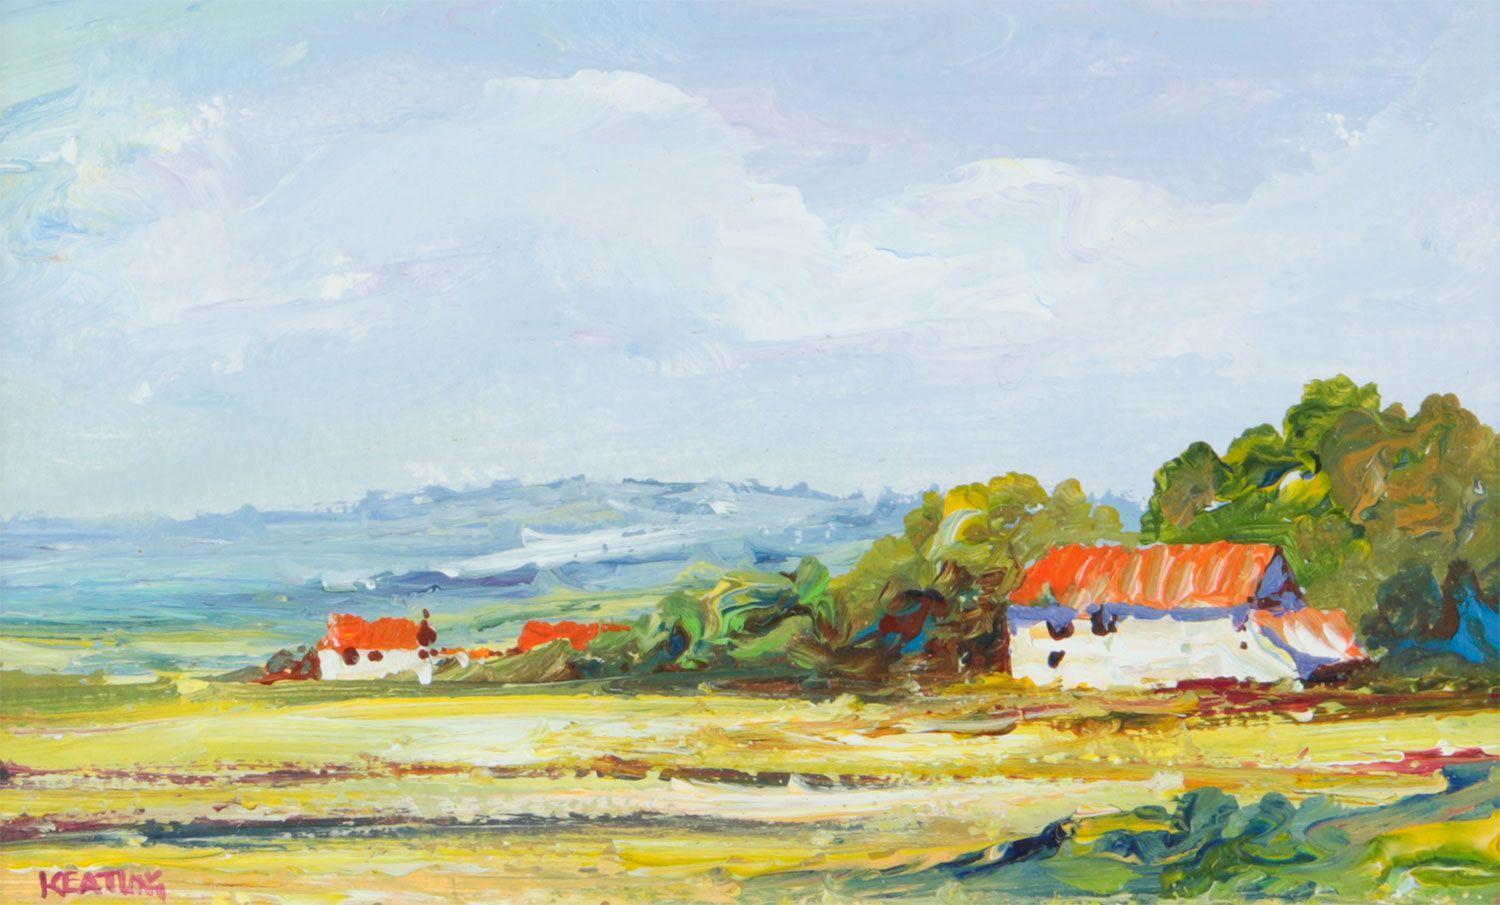 Mediterranean Cottages with Red Roof Tiles in Rural European Countryside - Impressionist Painting by Keating